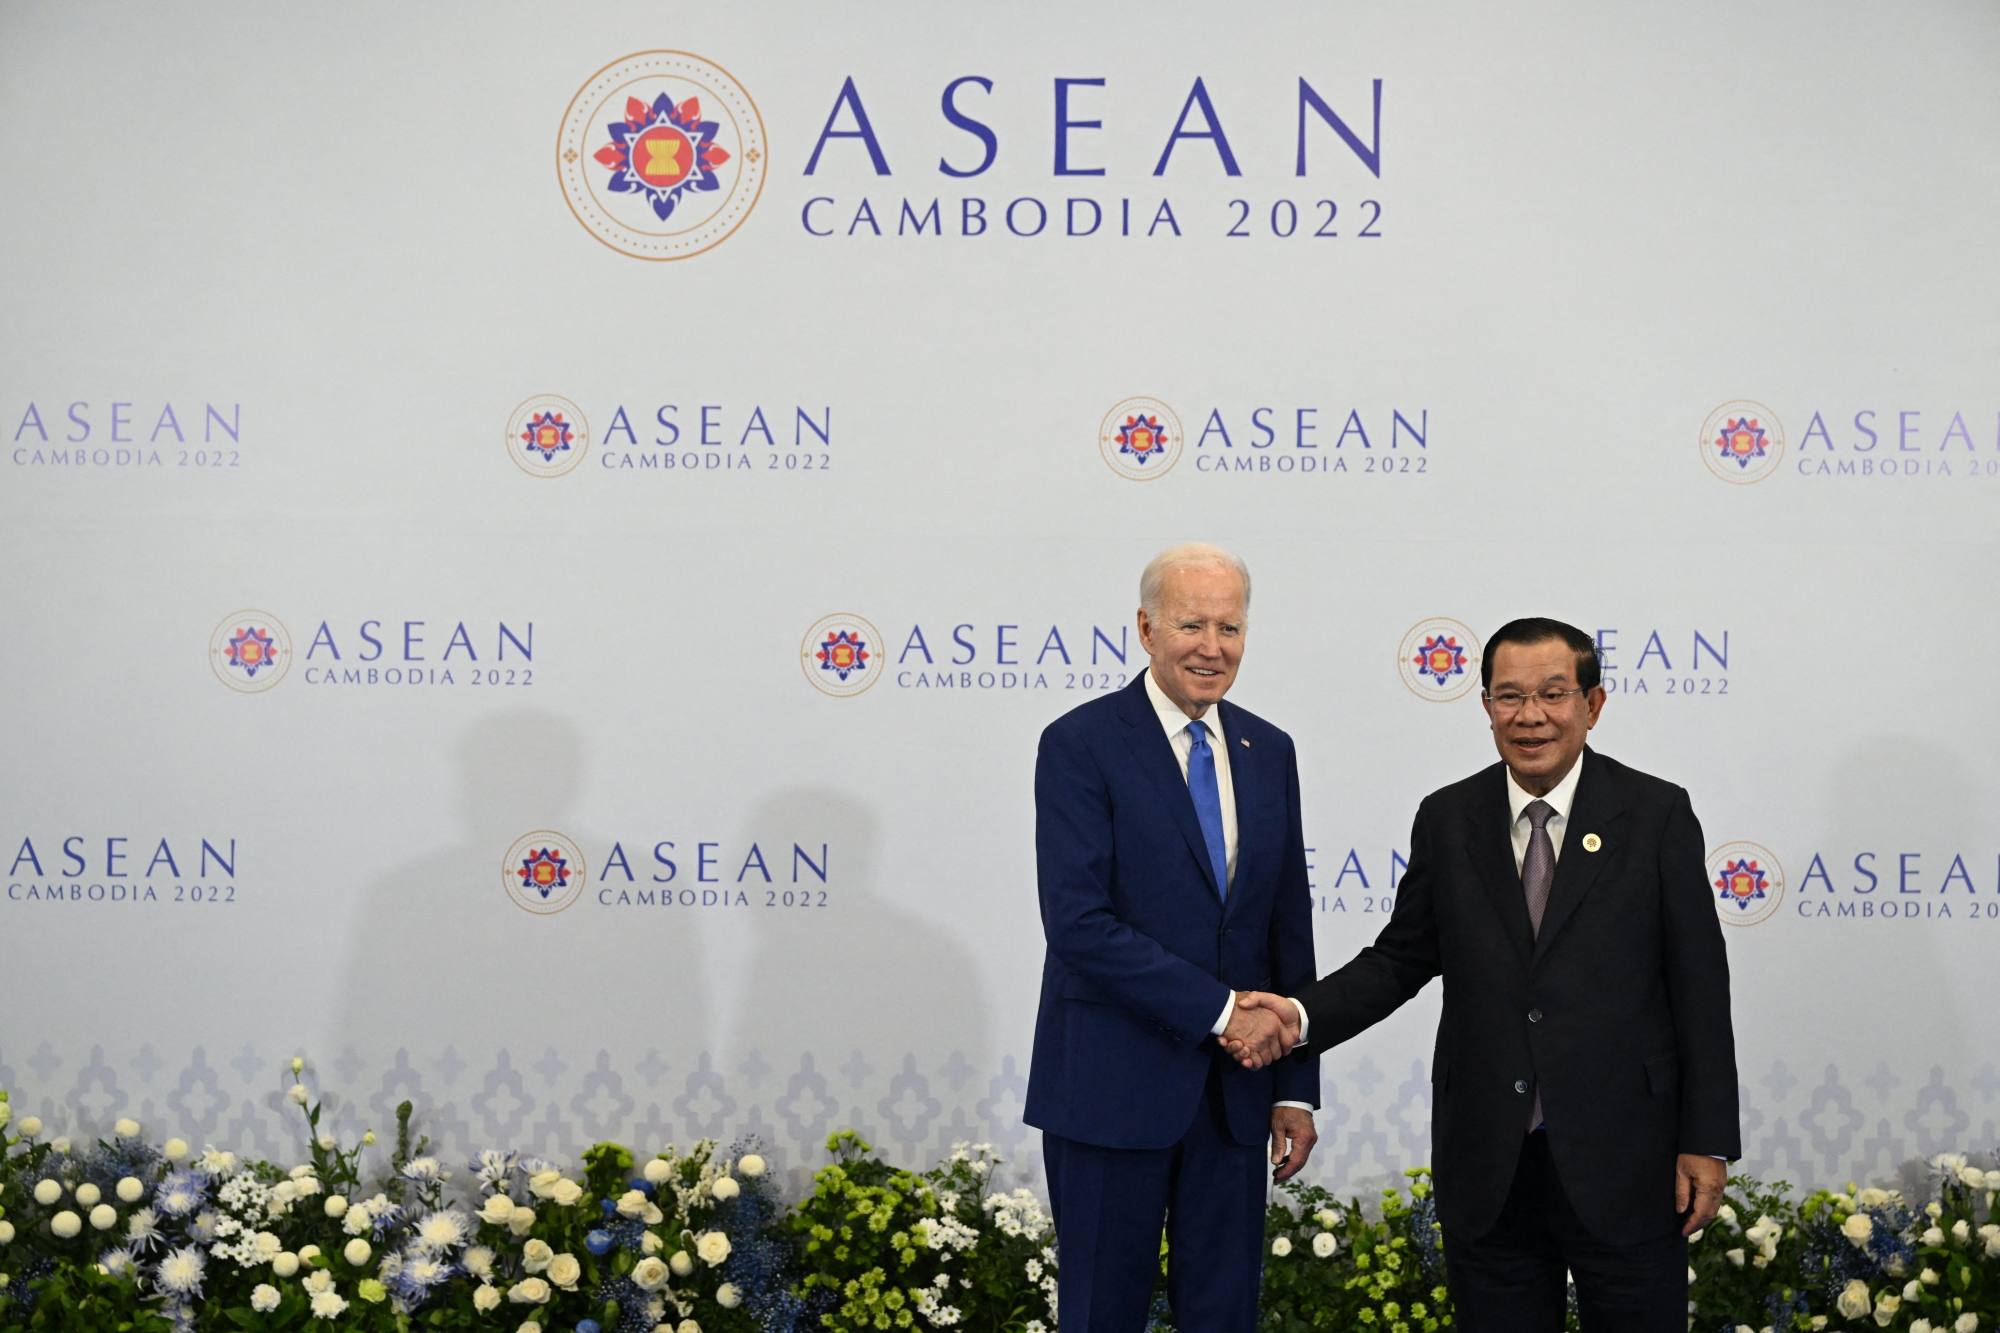 US President Joe Biden meets Cambodia’s Prime Minister Hun Sen on the sidelines of the Association of Southeast Asian Nations Summit in Phnom Penh on November 12, 2022. Photo: AFP